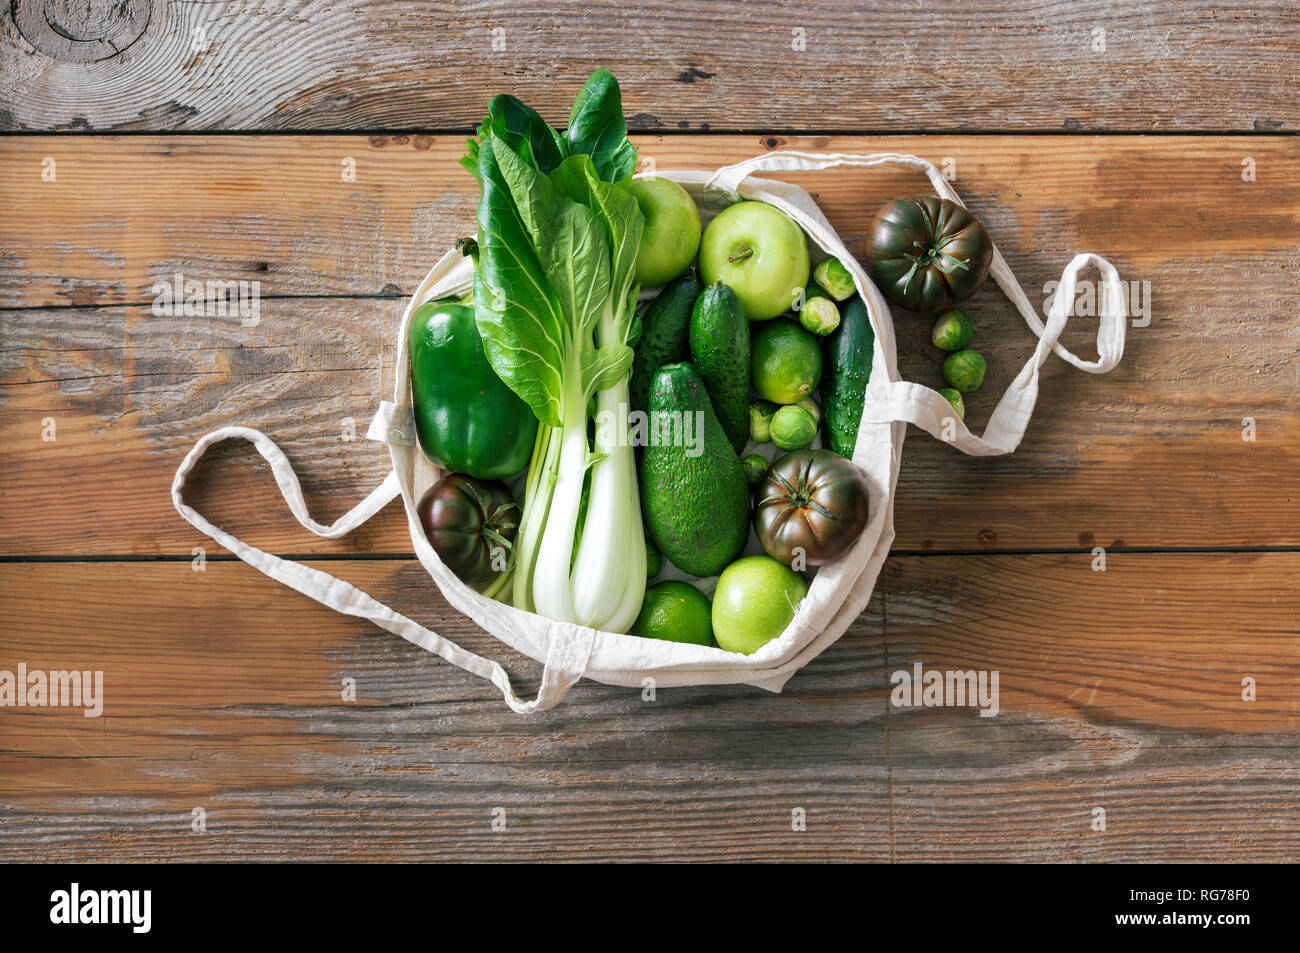 Fresh Organic Food Vegetables and Fruit In Fabric Eco Bag. Vegetarian Or Vegan Food On Wooden Background Top View Flat Lay Stock Photo